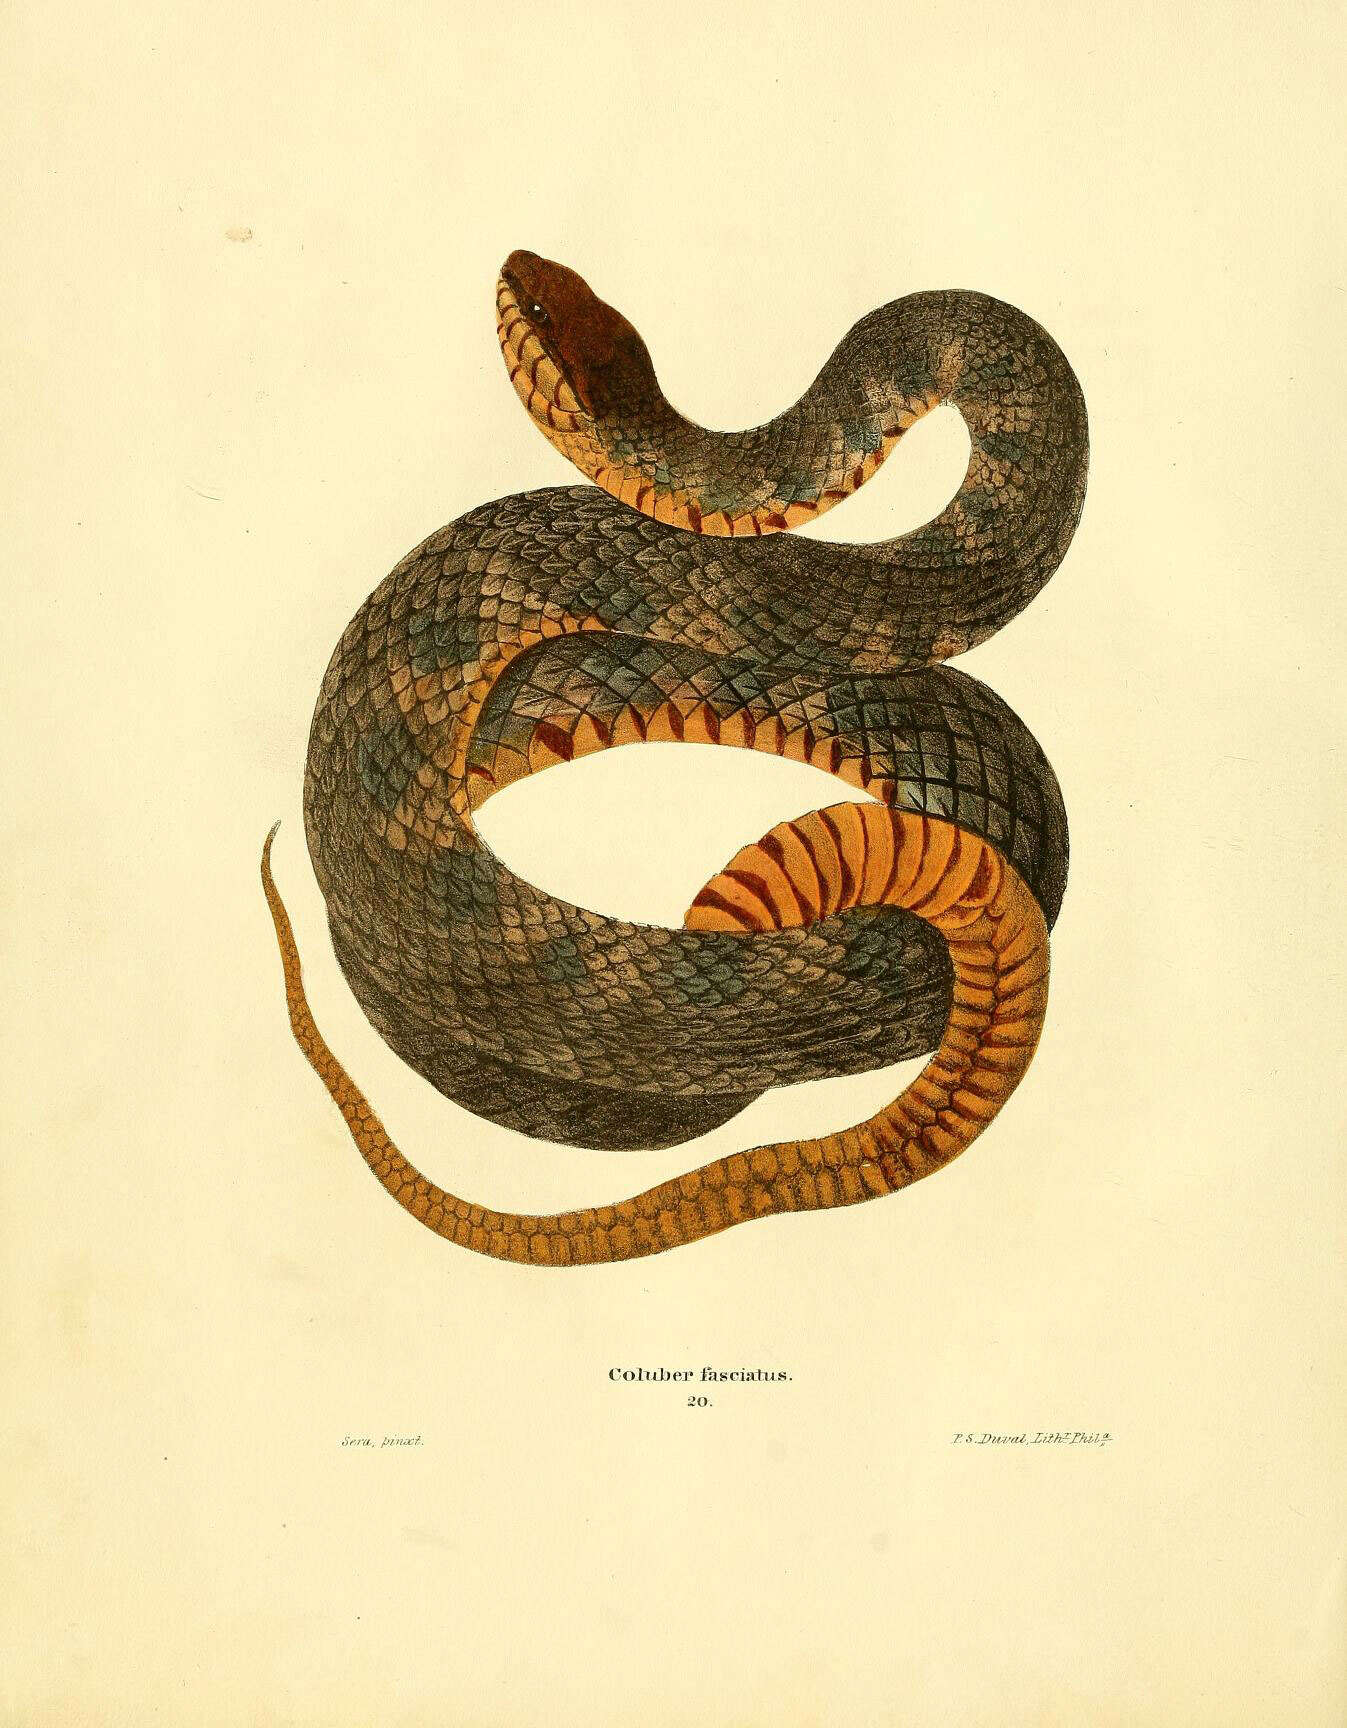 Image of Southern Water Snake